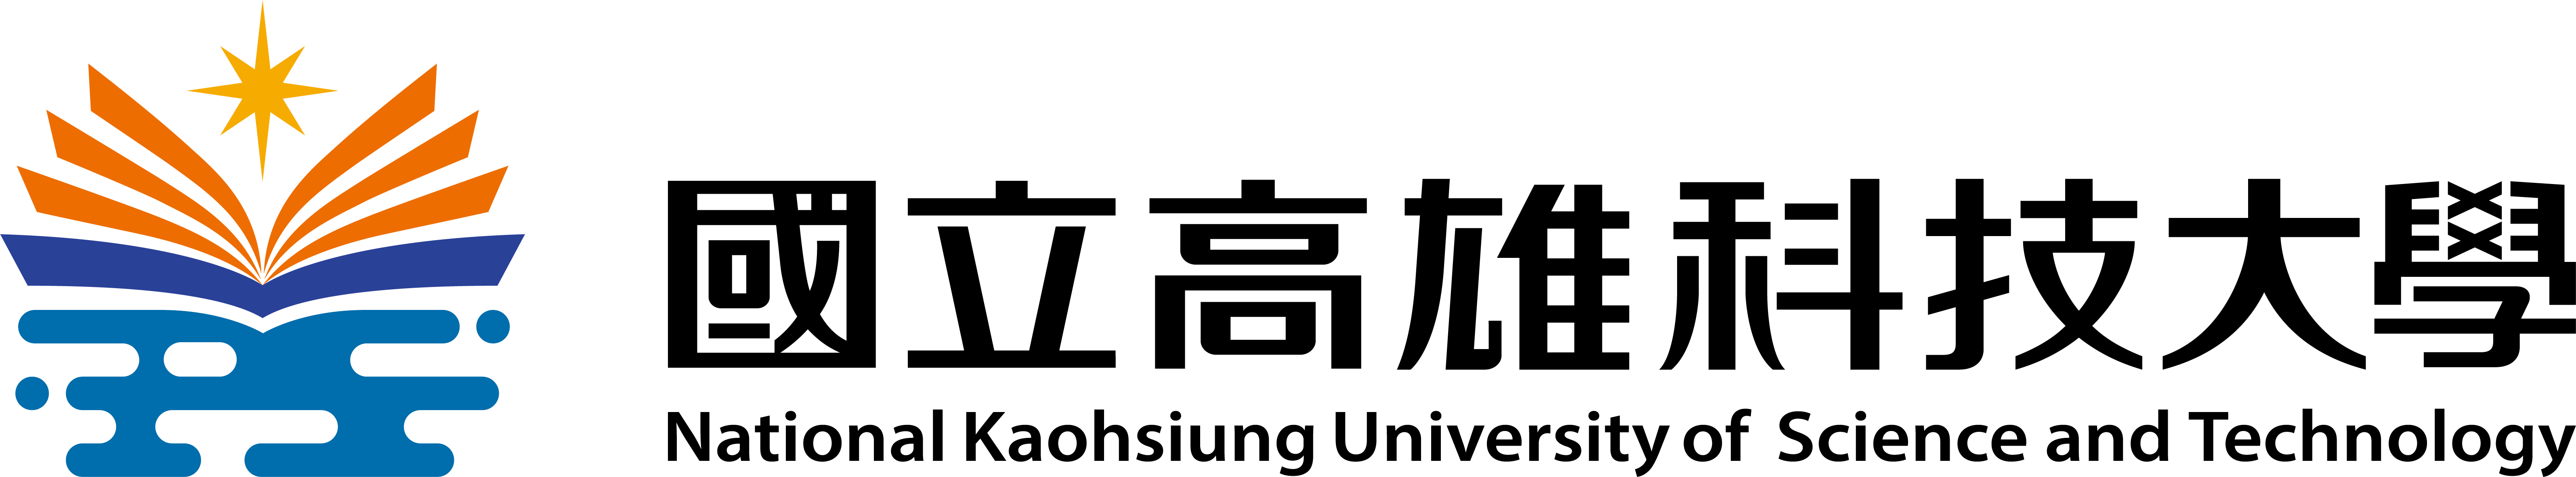 National Kaohsiung University of Science and Technology Taiwan